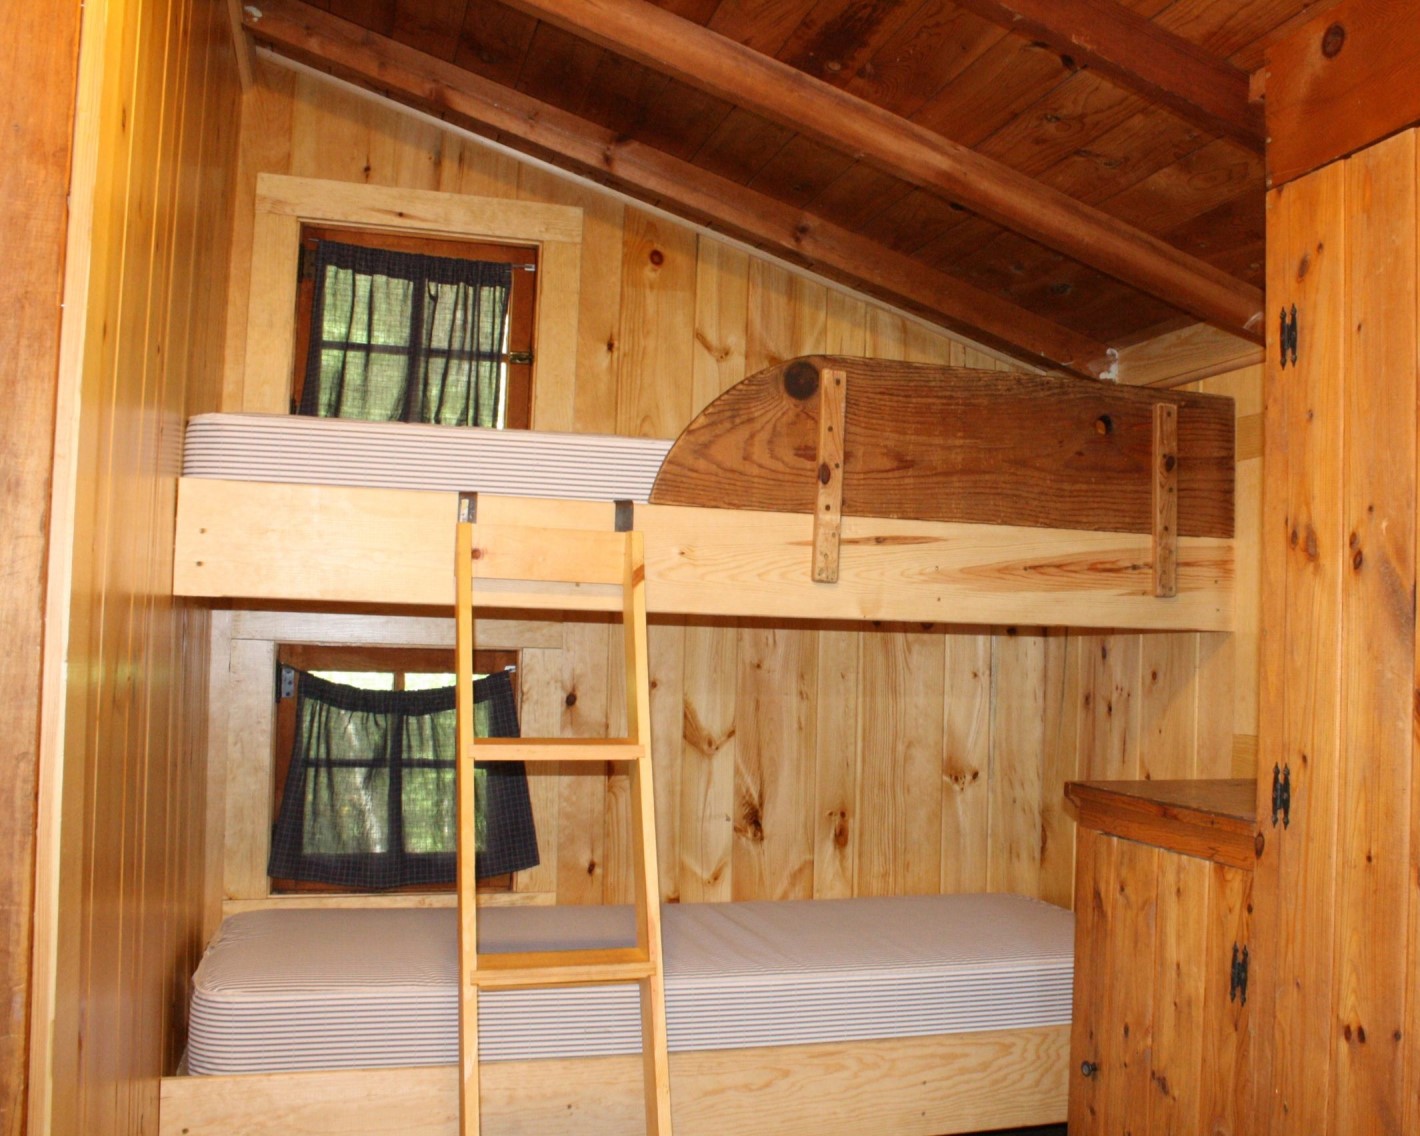 Picture of the bedroom's bunk bed, showing two twin beds